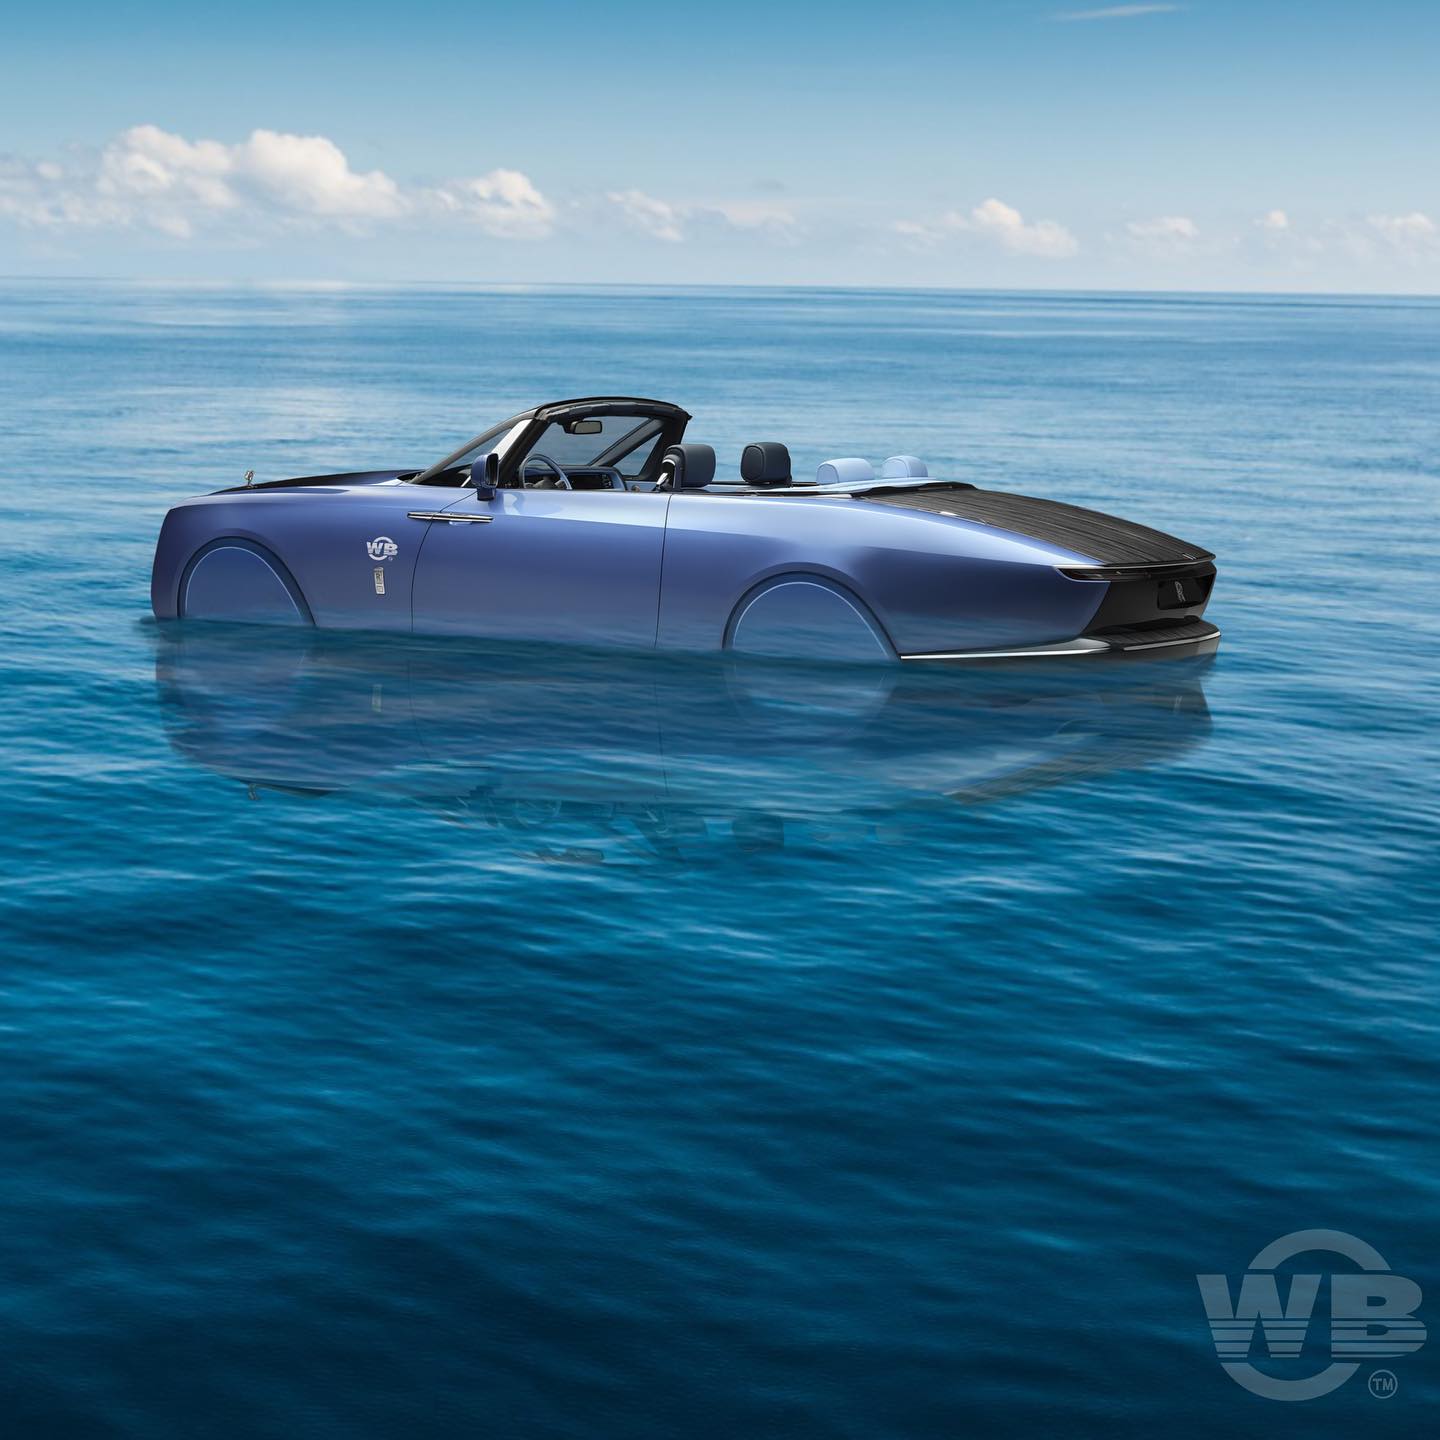 Set sail in the Rolls-Royce Boat Tail